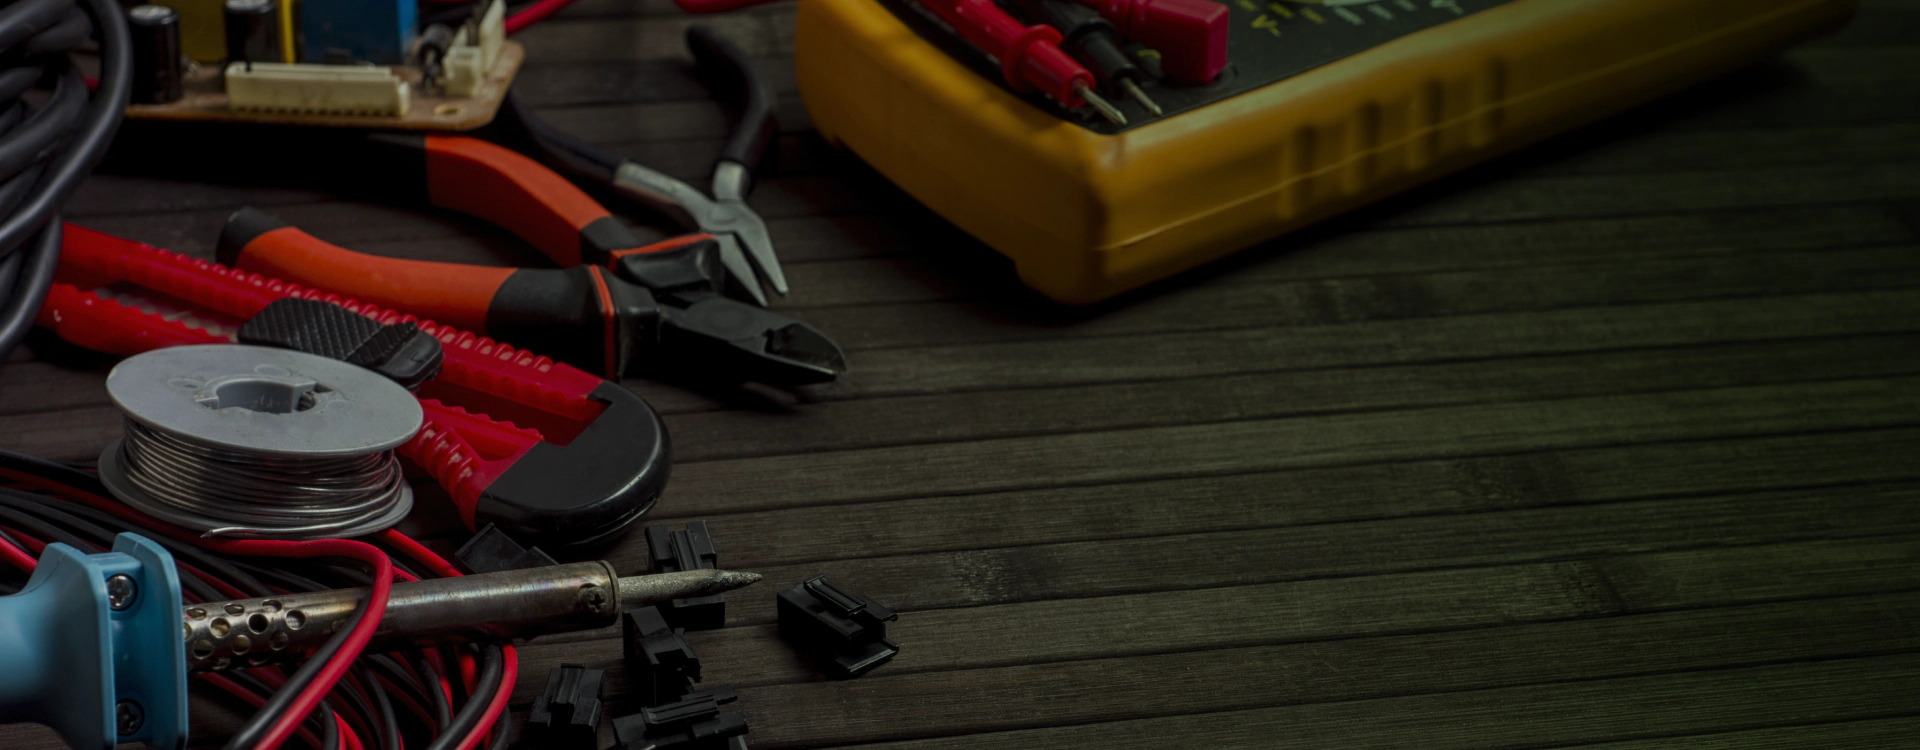 electrical tools on a table